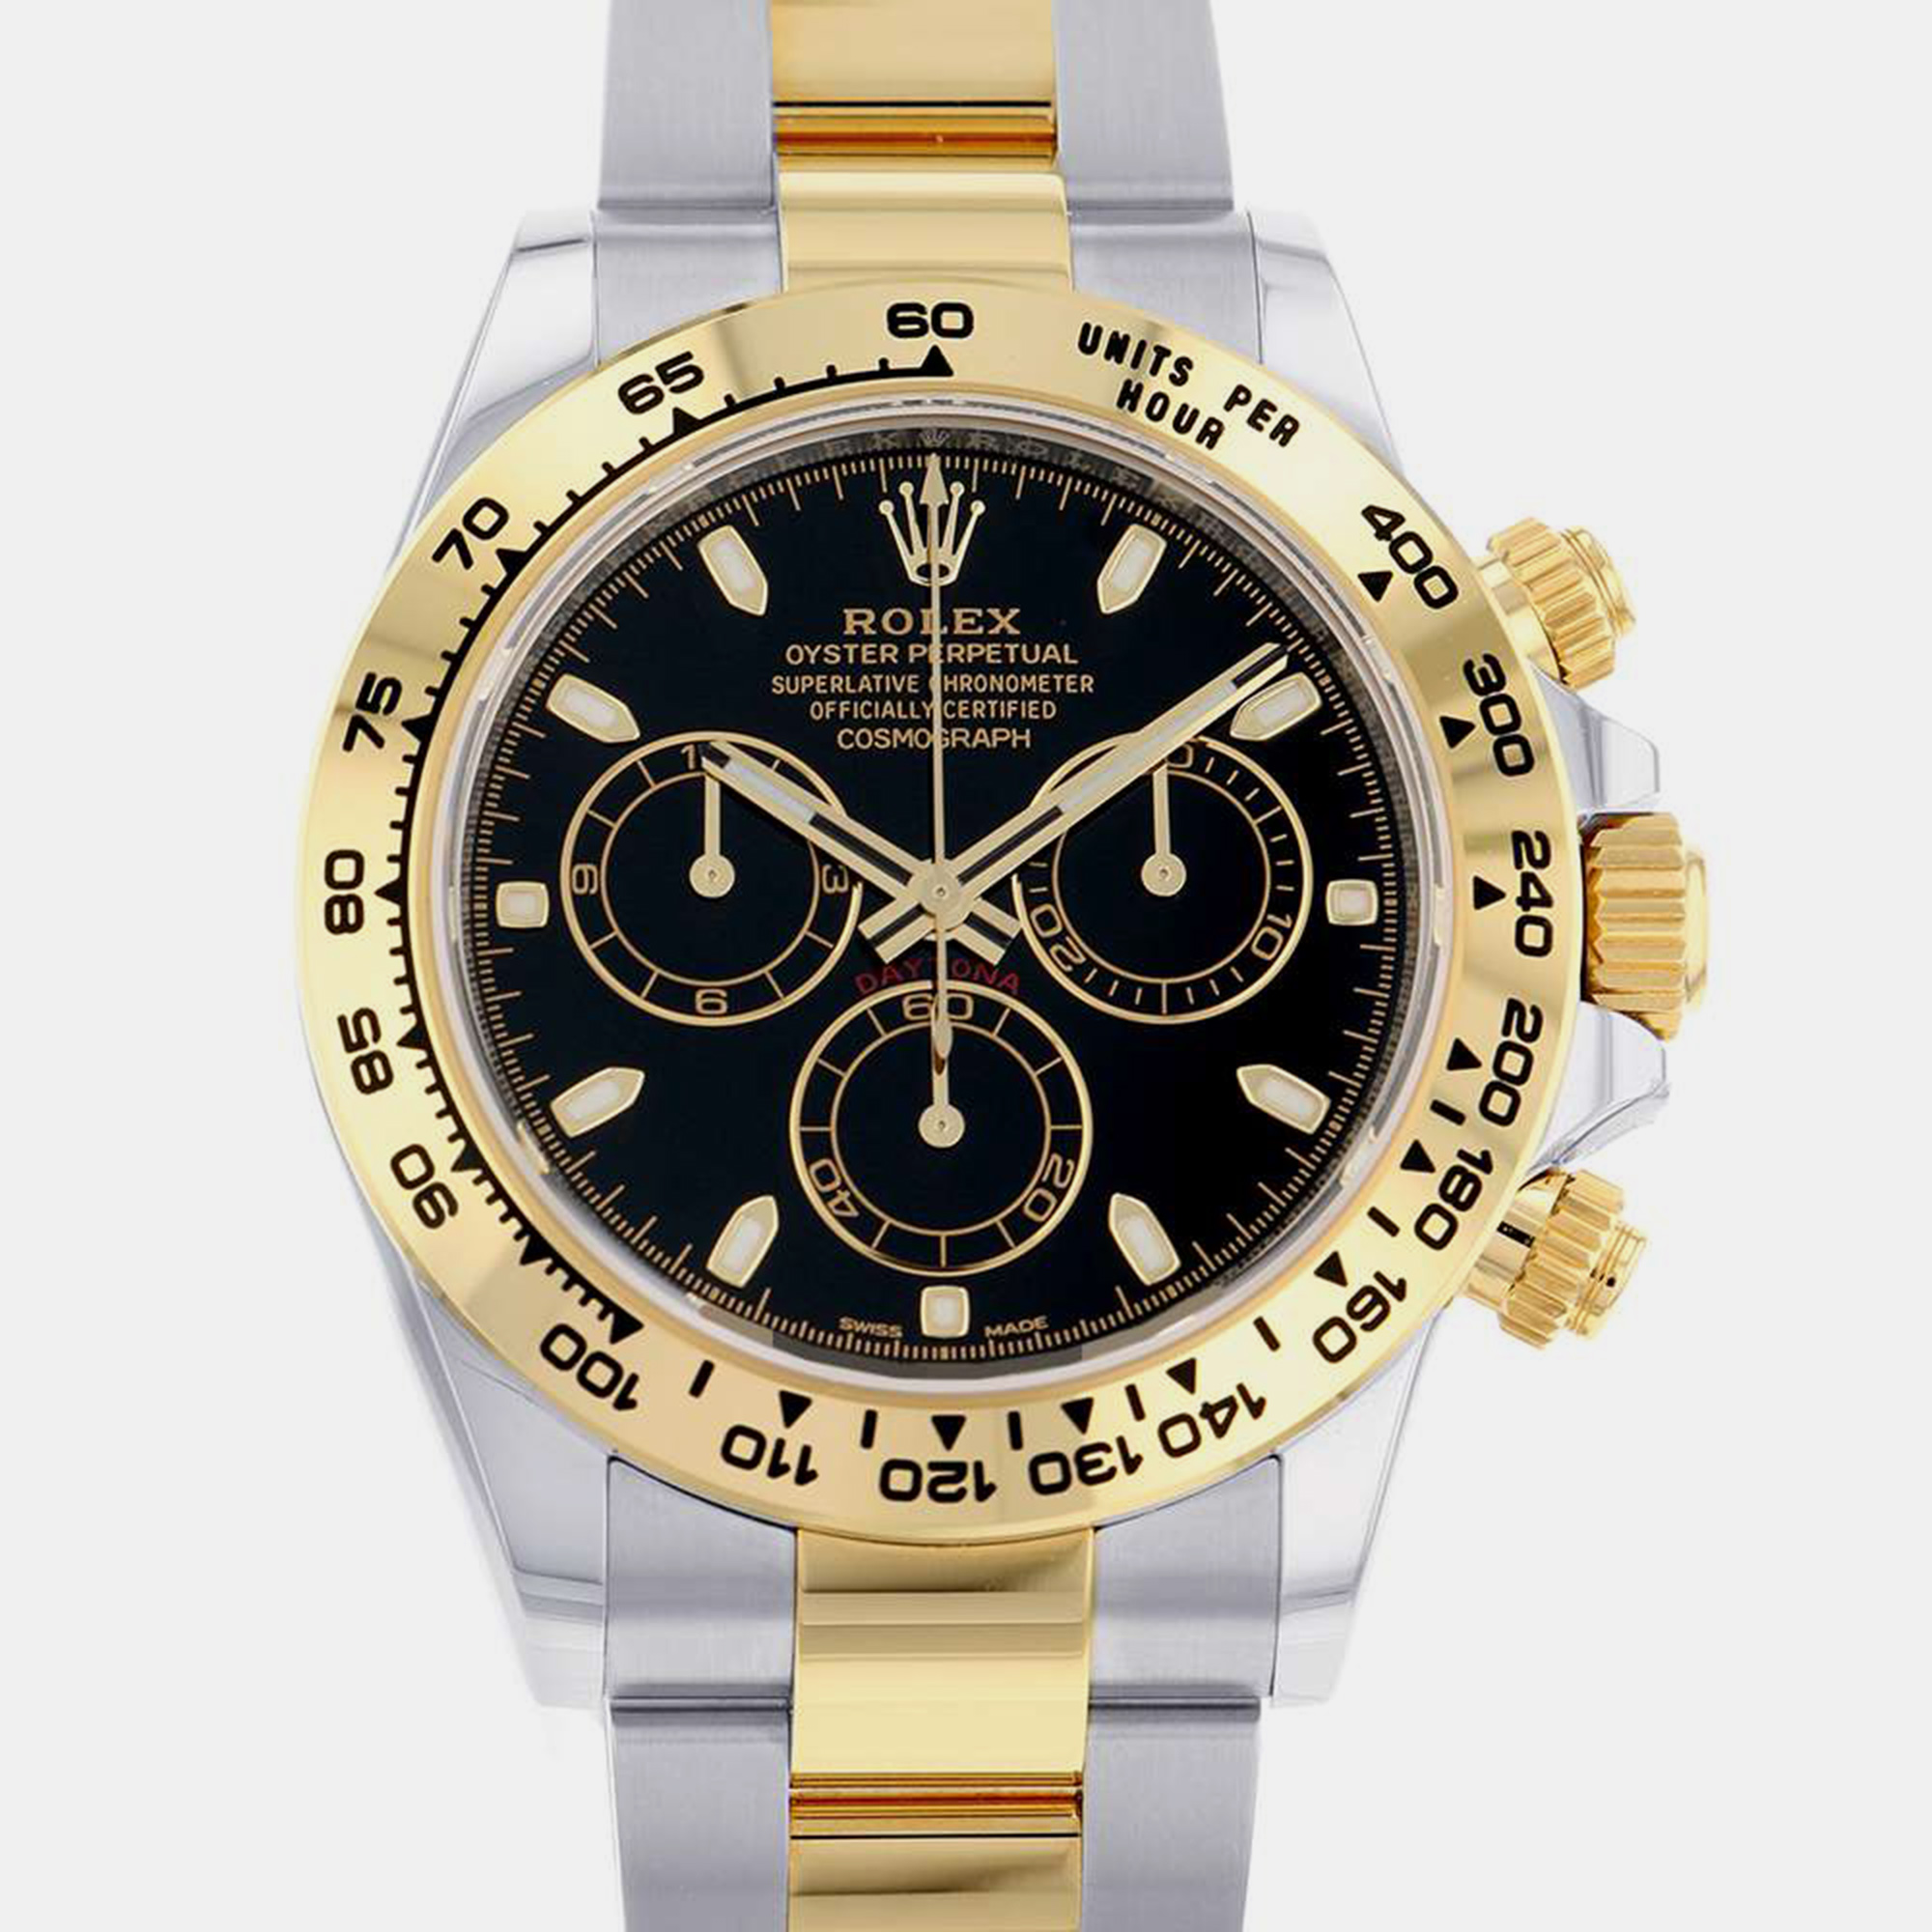 Rolex Black 18k Yellow Gold And Stainless Steel Cosmograph Daytona 116503 Automatic Men's Wristwatch 40 Mm